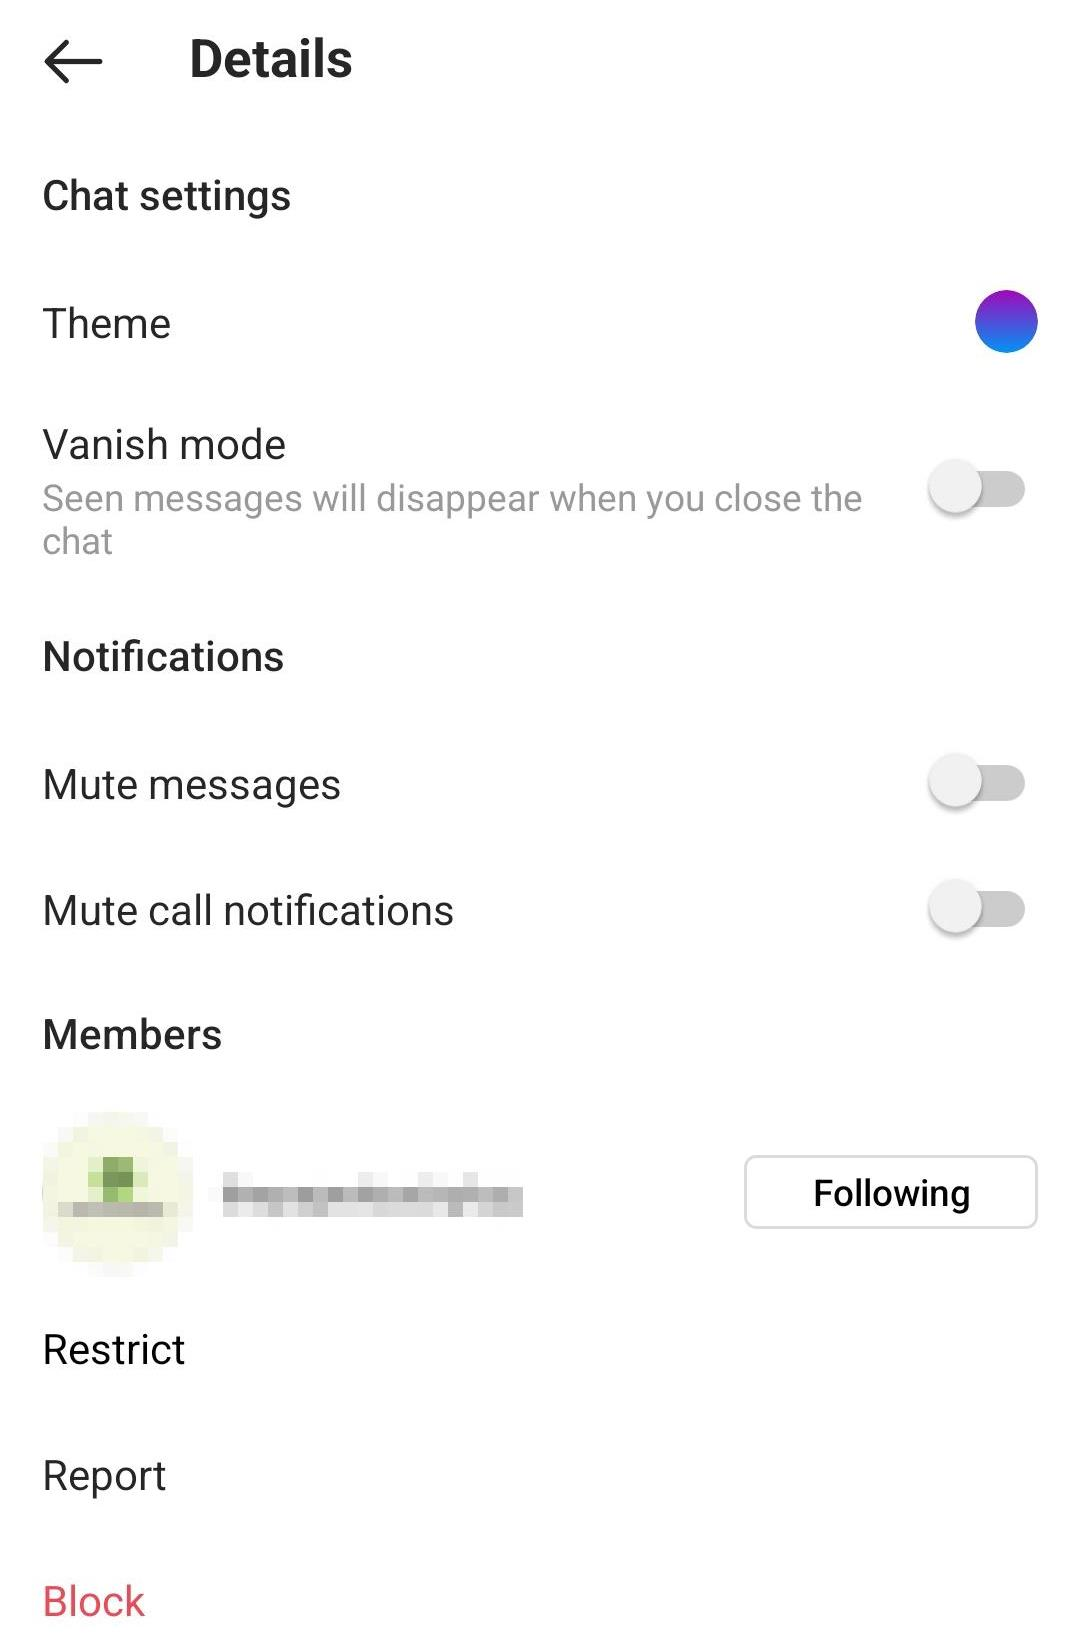 Chat settings for specific messages on Instagram 